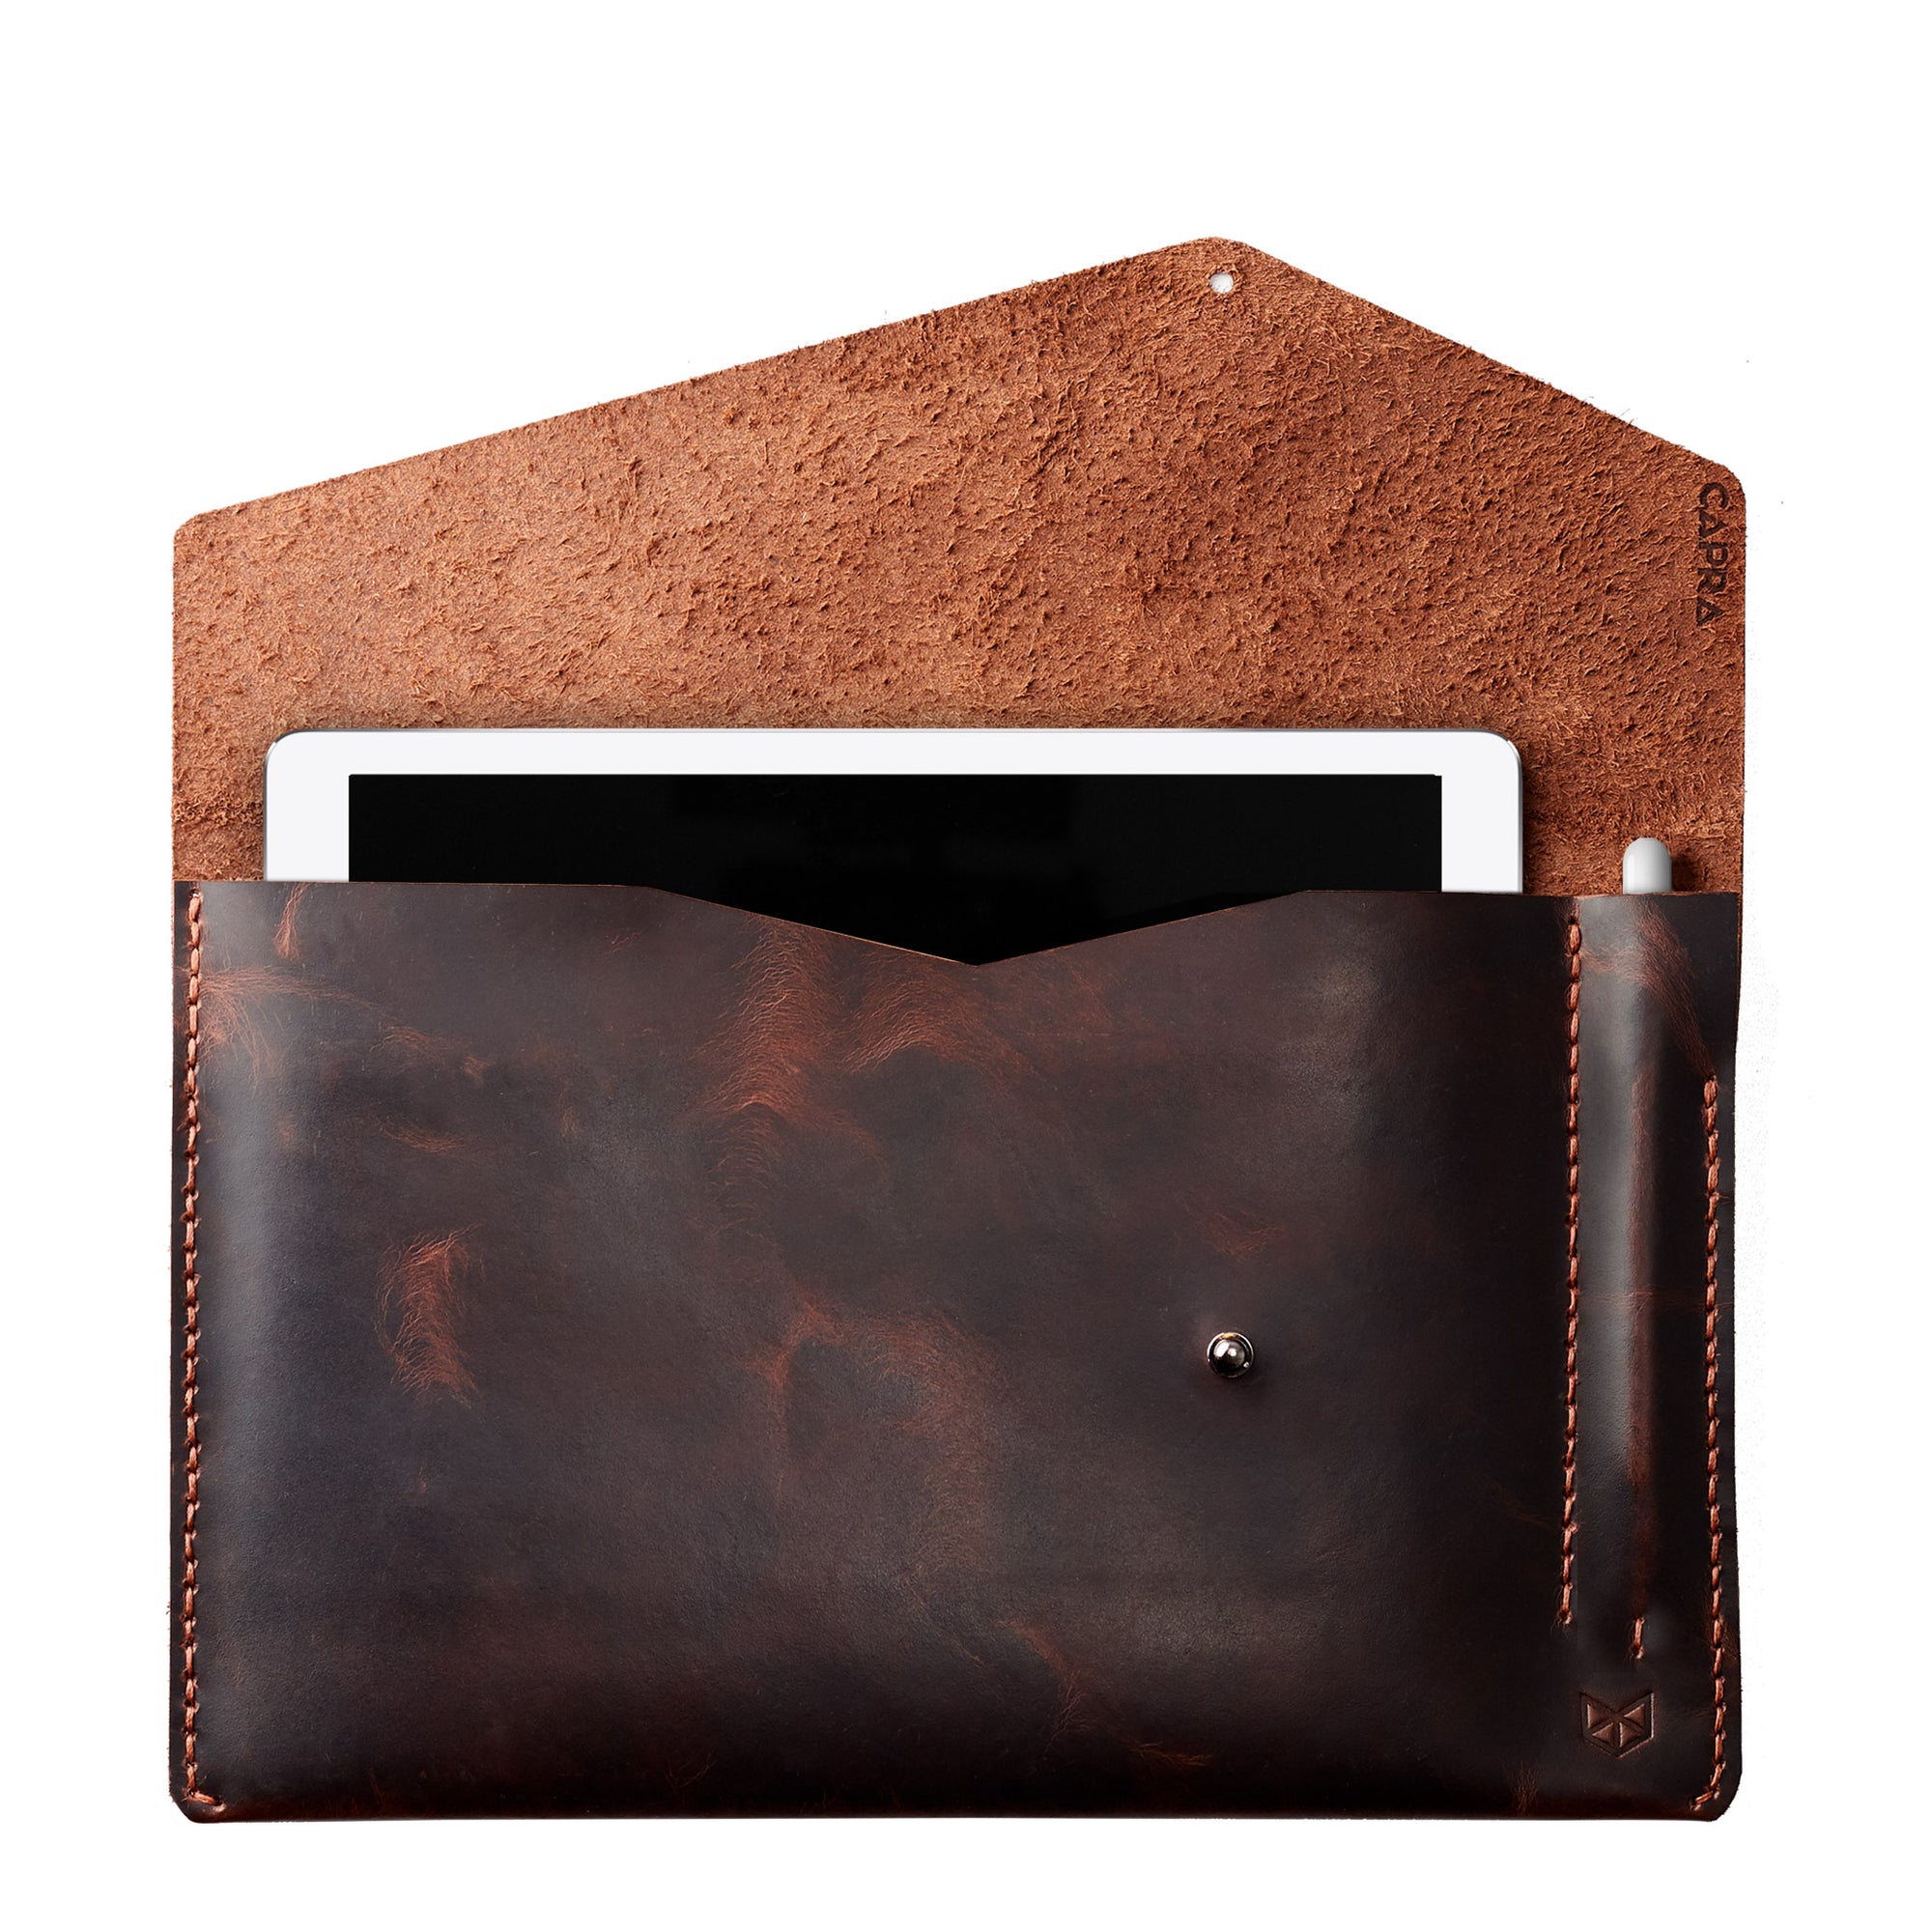 Style front view. Cognac draftsman 5 case by Capra Leather. Microsoft Surface sleeve.